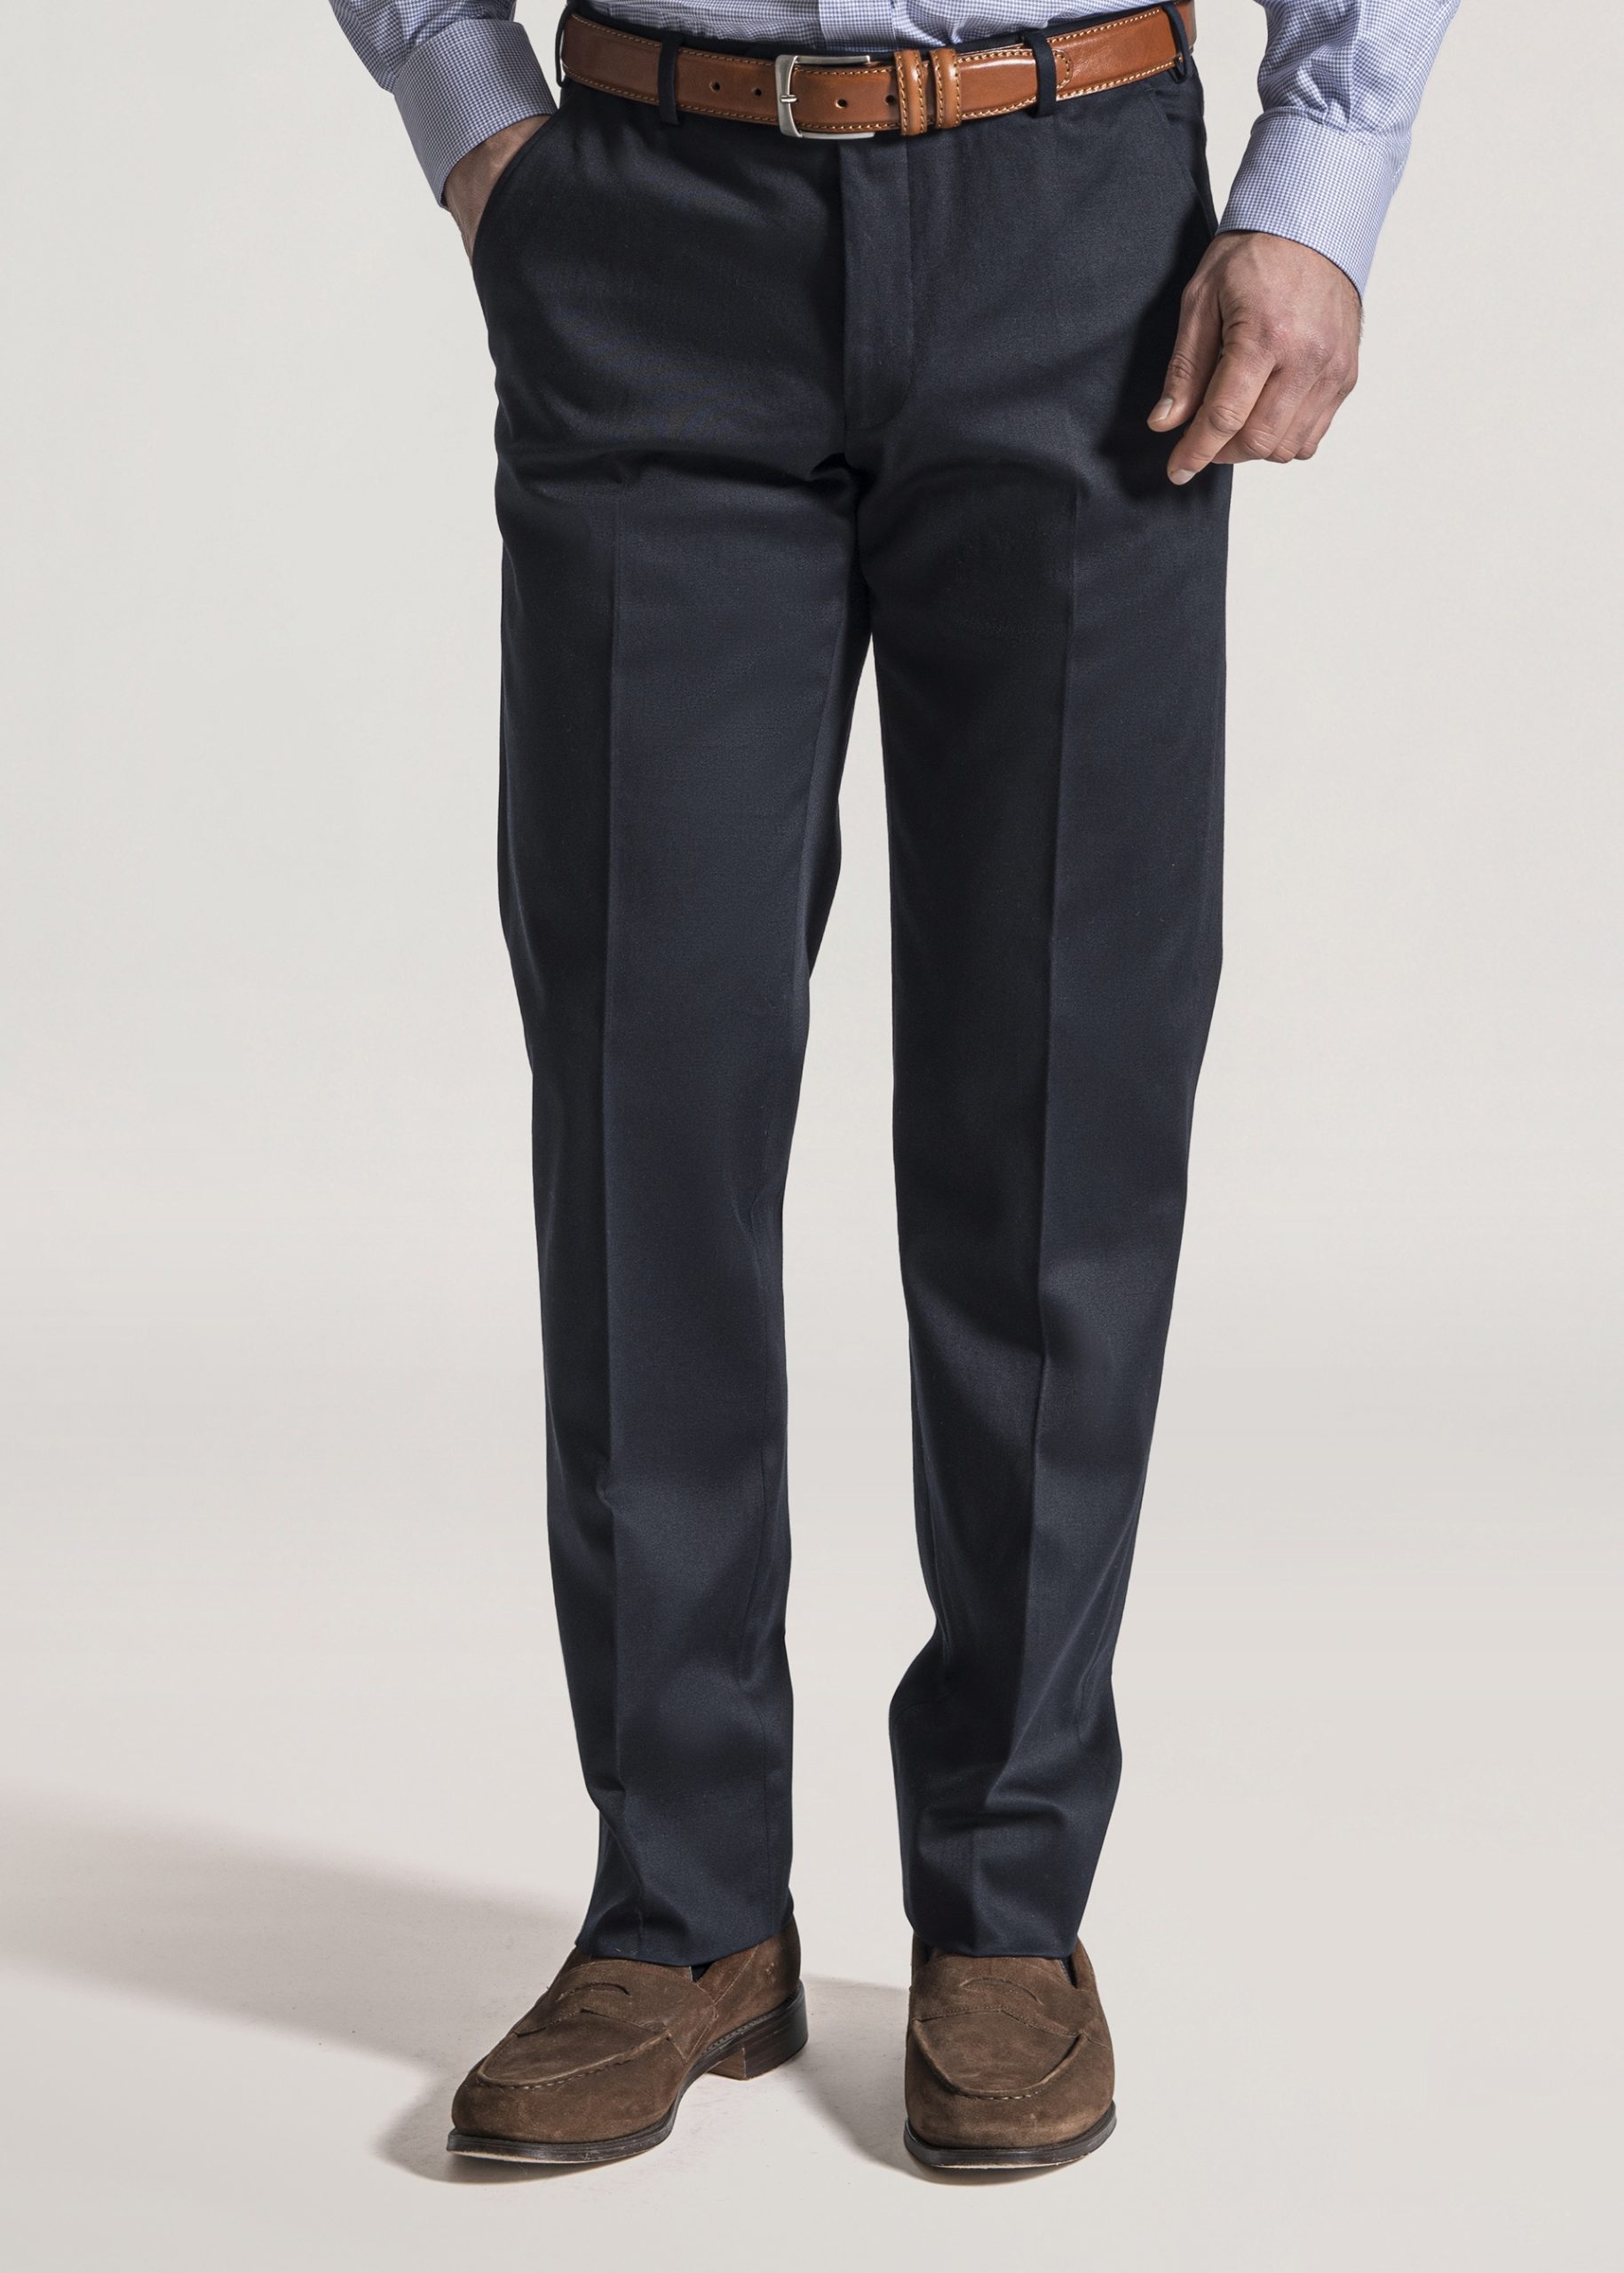 Roderick Charles navy twill trousers